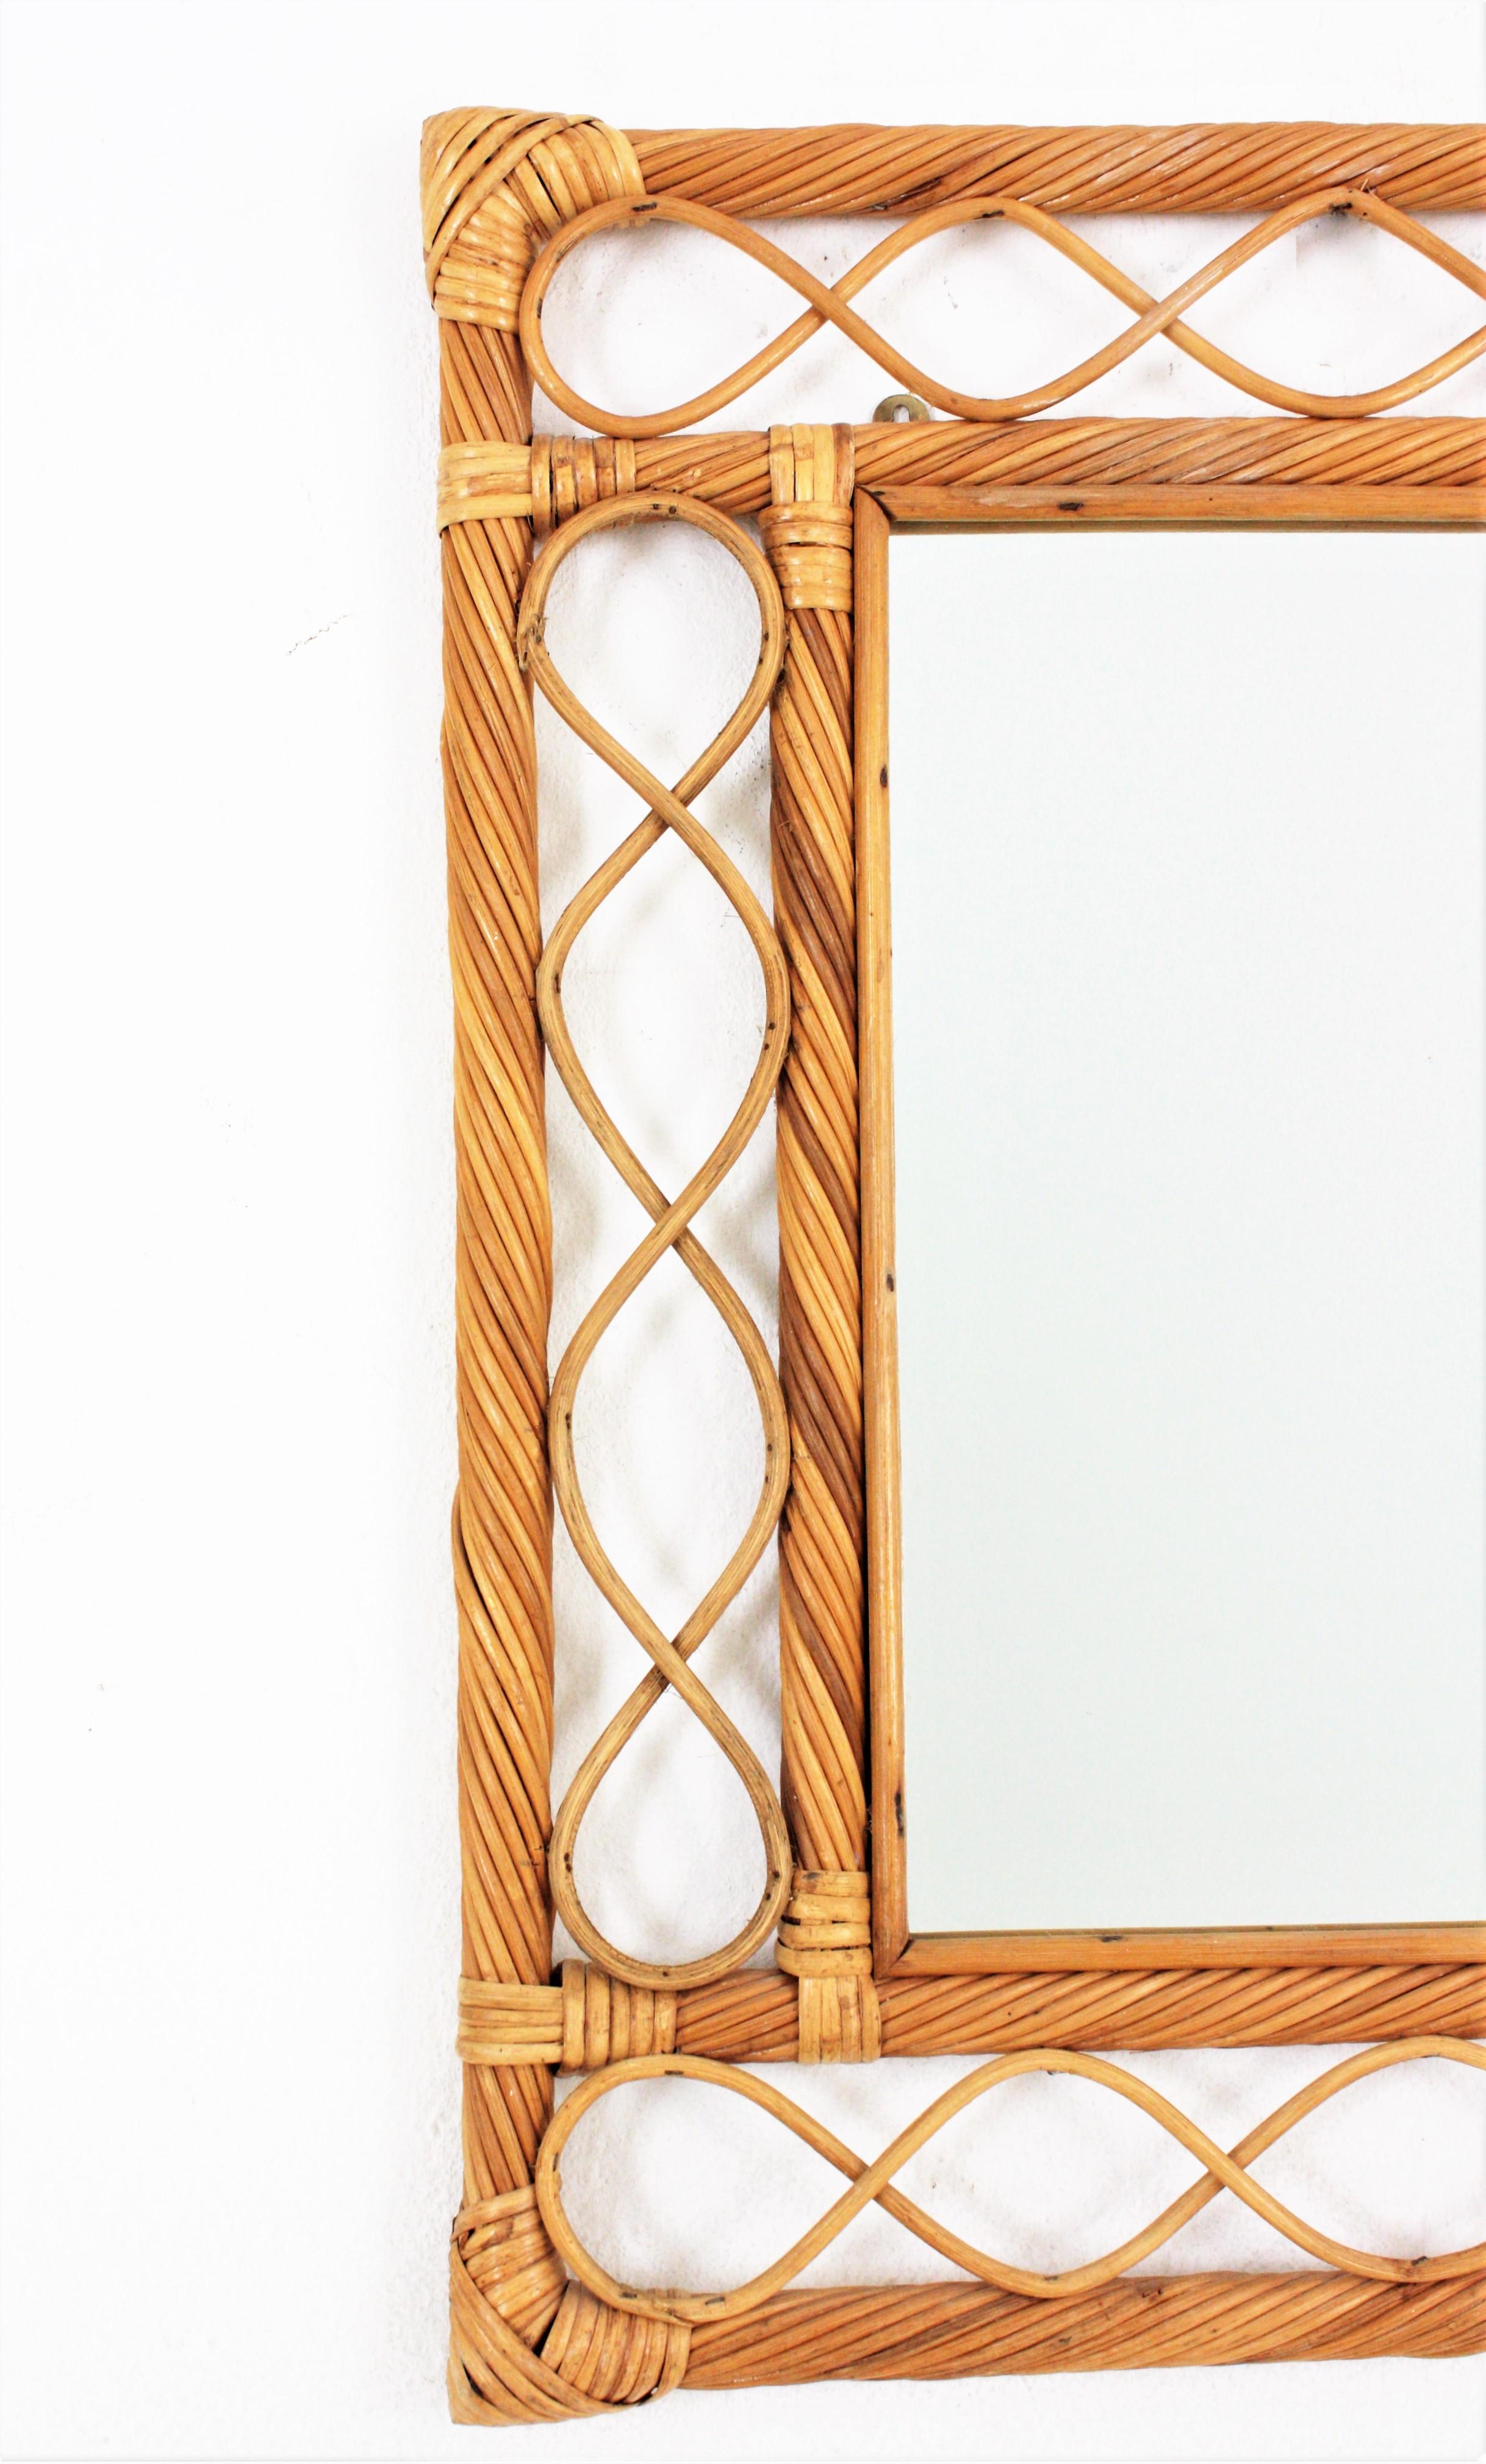 Hand-Crafted Rattan Pencil Reed Franco Albini Style Rectangular Mirror